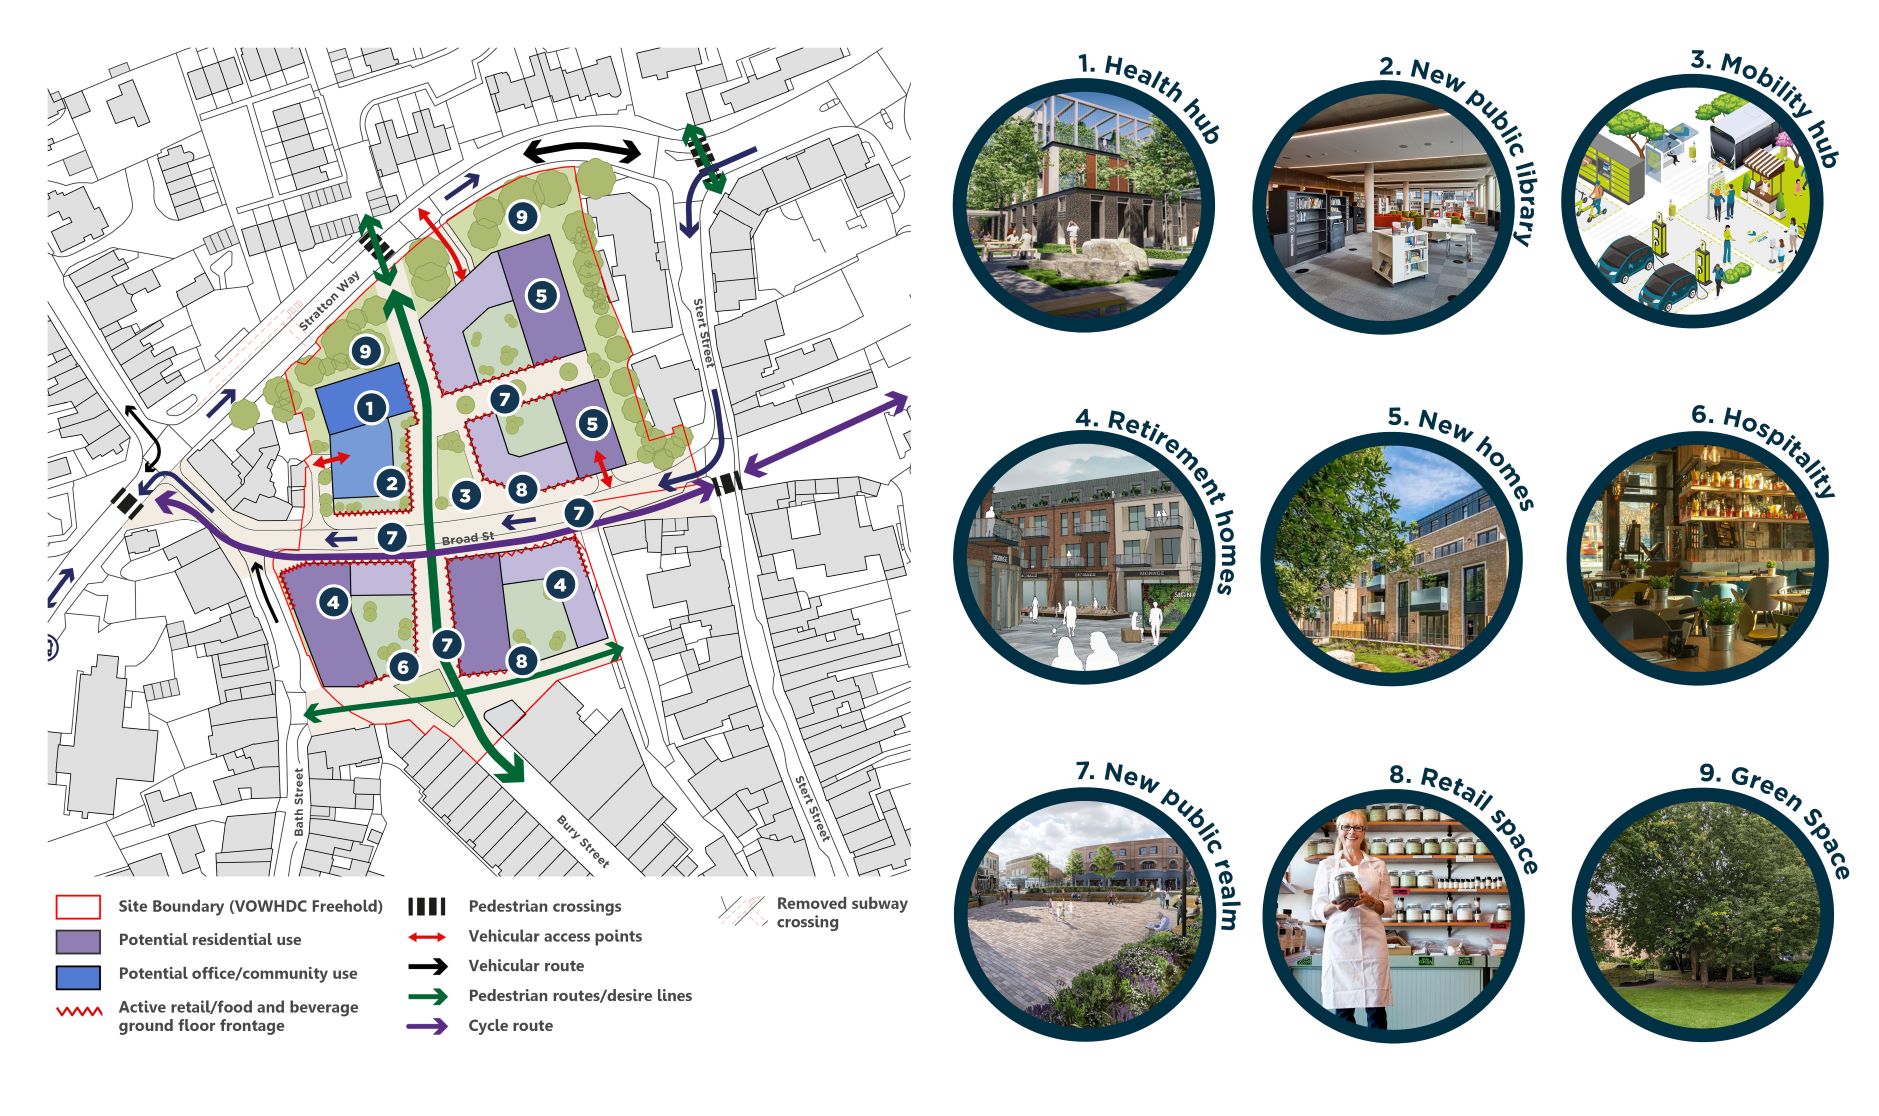 A concept plan of The Charter and Bury Street North sites showing five potential new buildings across the two development opportunity sites connected by public realm and key pedestrian connectivity from the north at Stratton Way to Bury Street to the south. The plan shows the subway crossing at Stratton Way removed and pedestrian crossings at key junctions between Stratton Way/Bath Street and Stratton Way and Stert Street. The plan shows the potential redirection of the bus route through Broad Street and possible residential/services access to the potential buildings off Stratton Way and Broad Street using the existing access points. There are 9 images related to possible uses and features for the site including: 1. Health Hub, 2. New Public Library, 3. Mobility hub, 4. Retirement Homes, 5. New Homes, 6. Hospitality, 7. New Public Realm, 8. Retail Space, 9. Green Space.